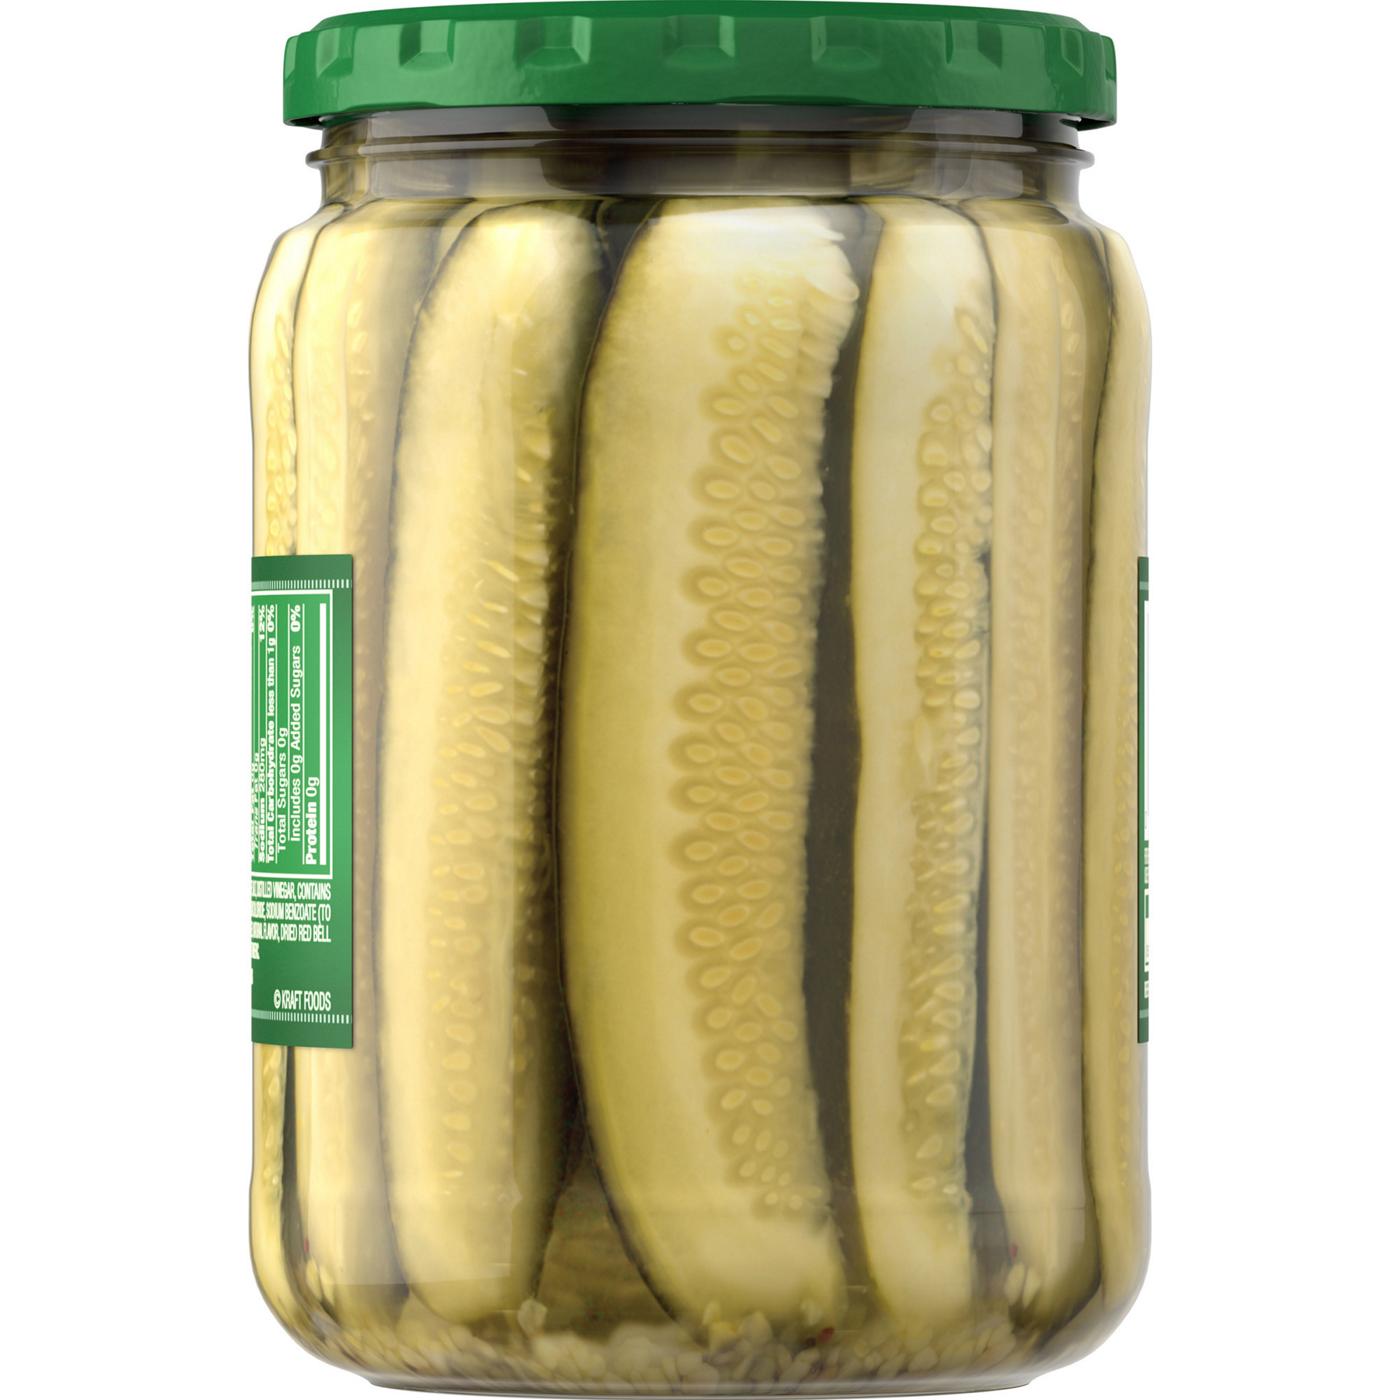 Claussen Kosher Dill Spears; image 8 of 9